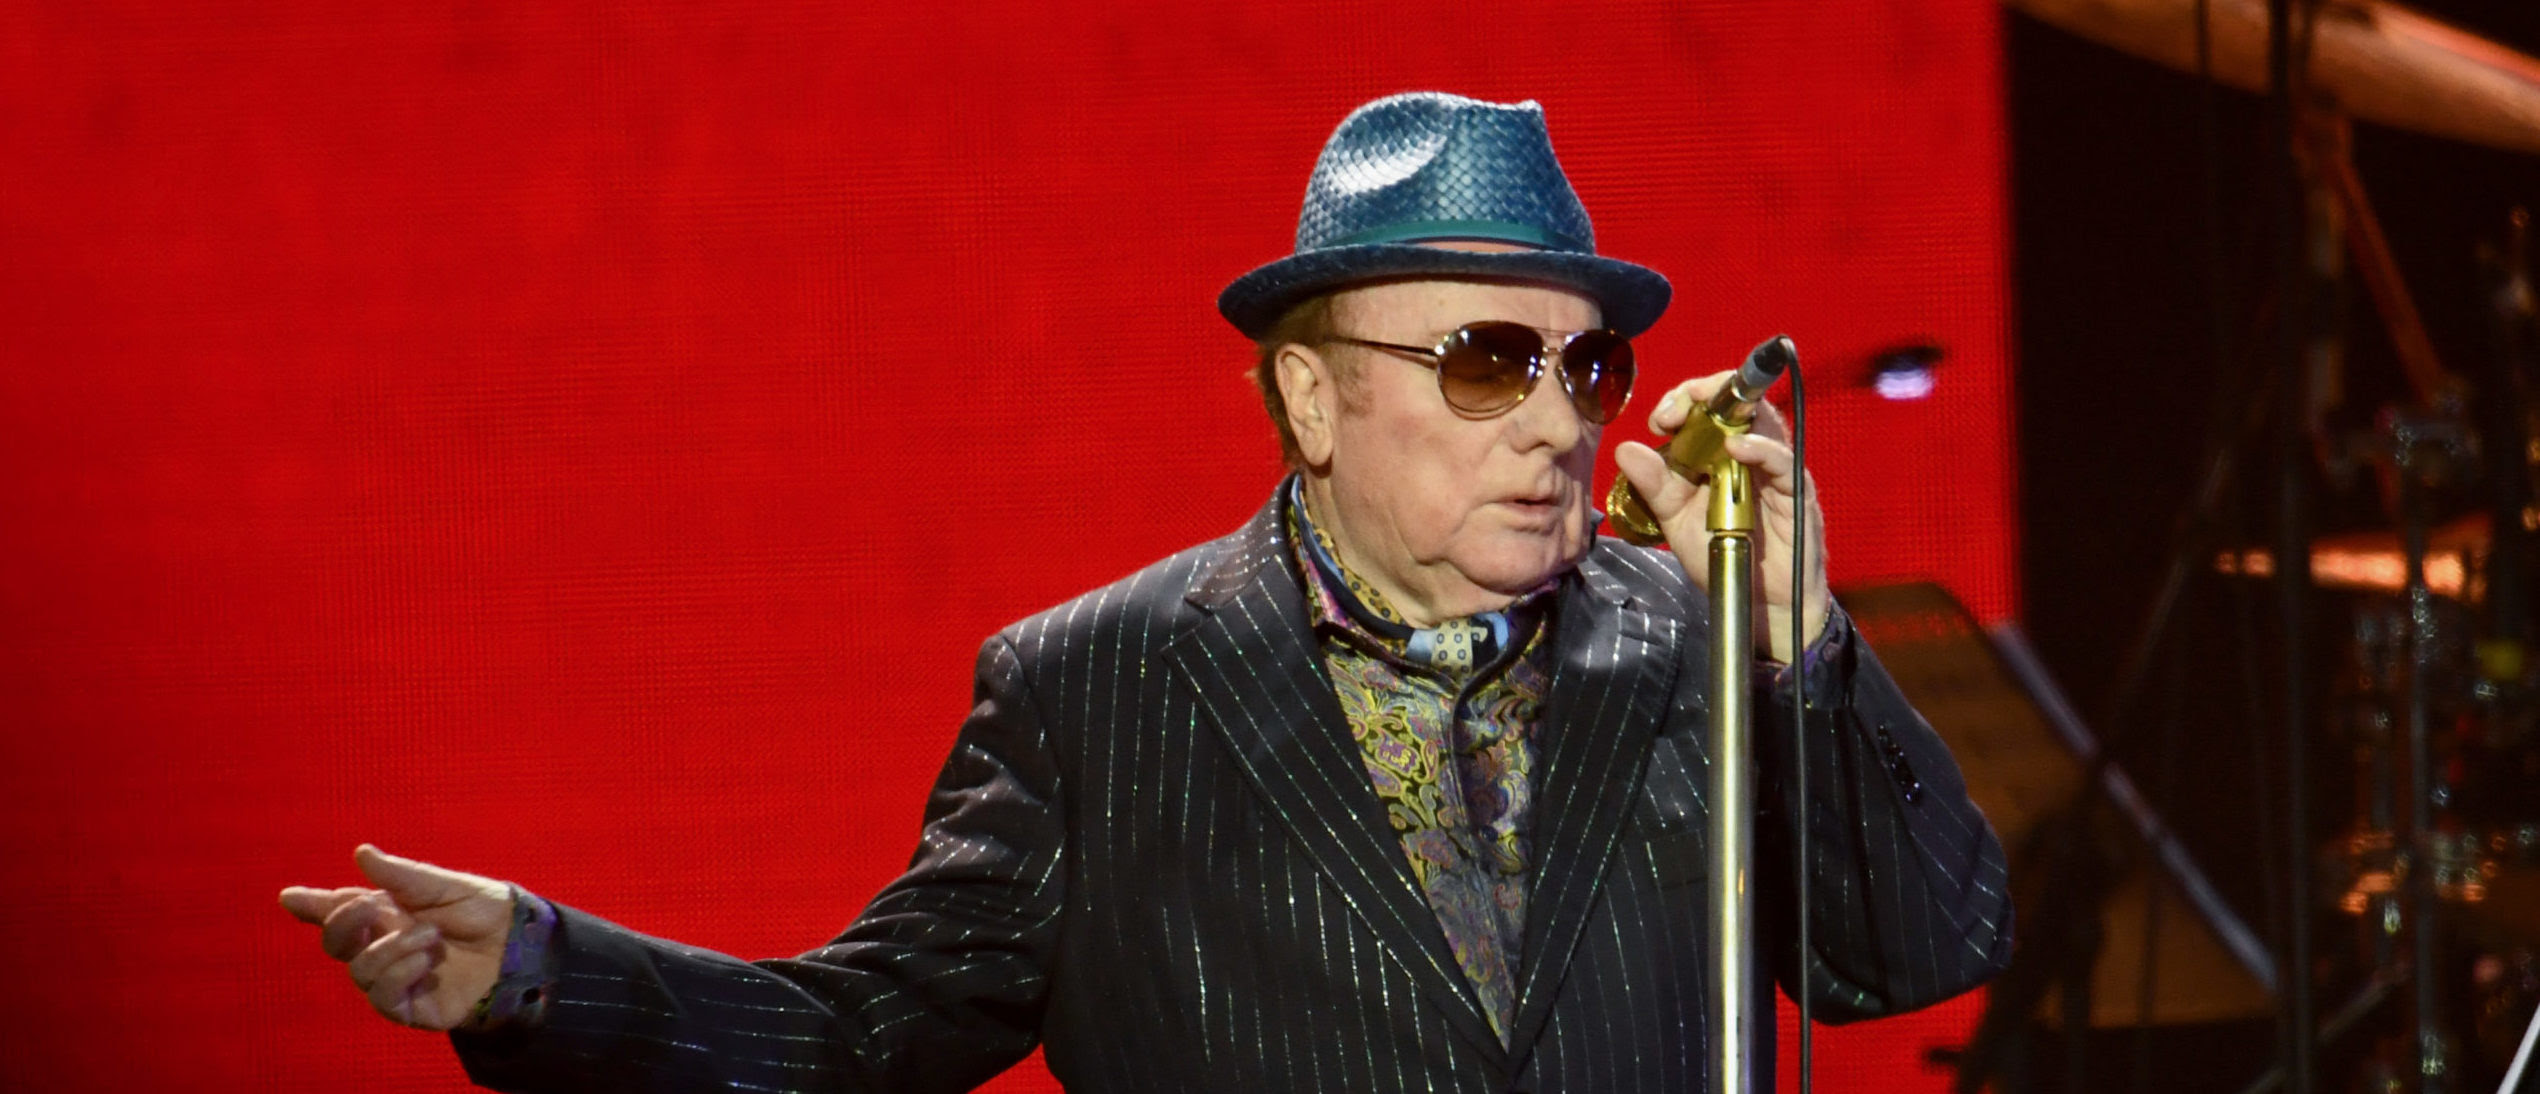 Health Minister For Northern Ireland Suing Van Morrison For Criticizing Lockdowns